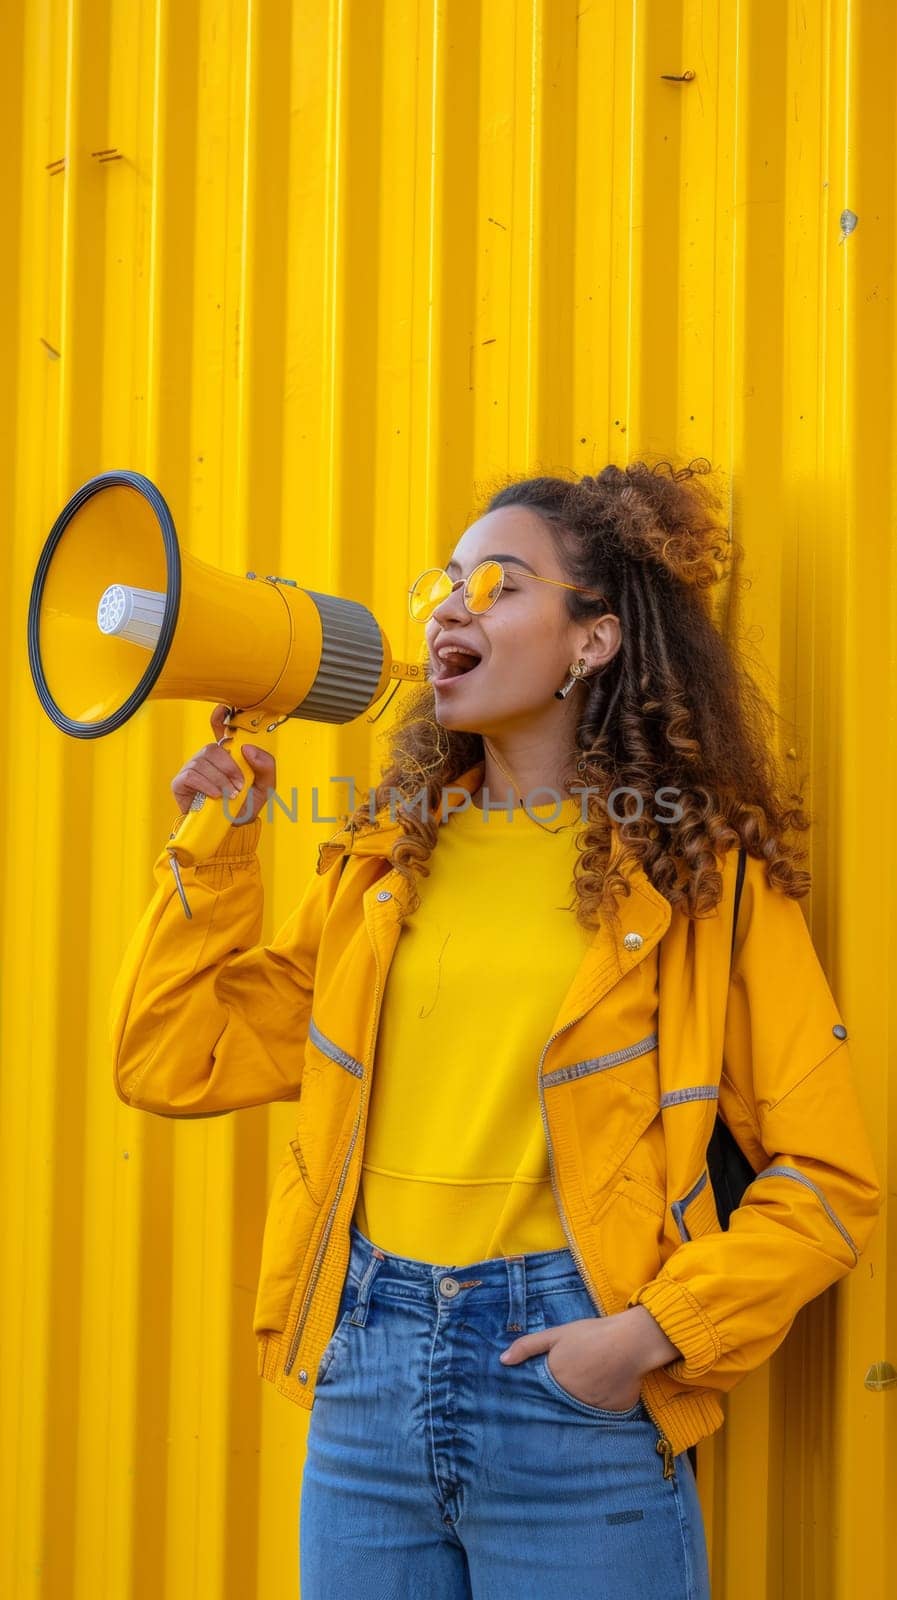 A woman in yellow jacket and jeans holding a megaphone